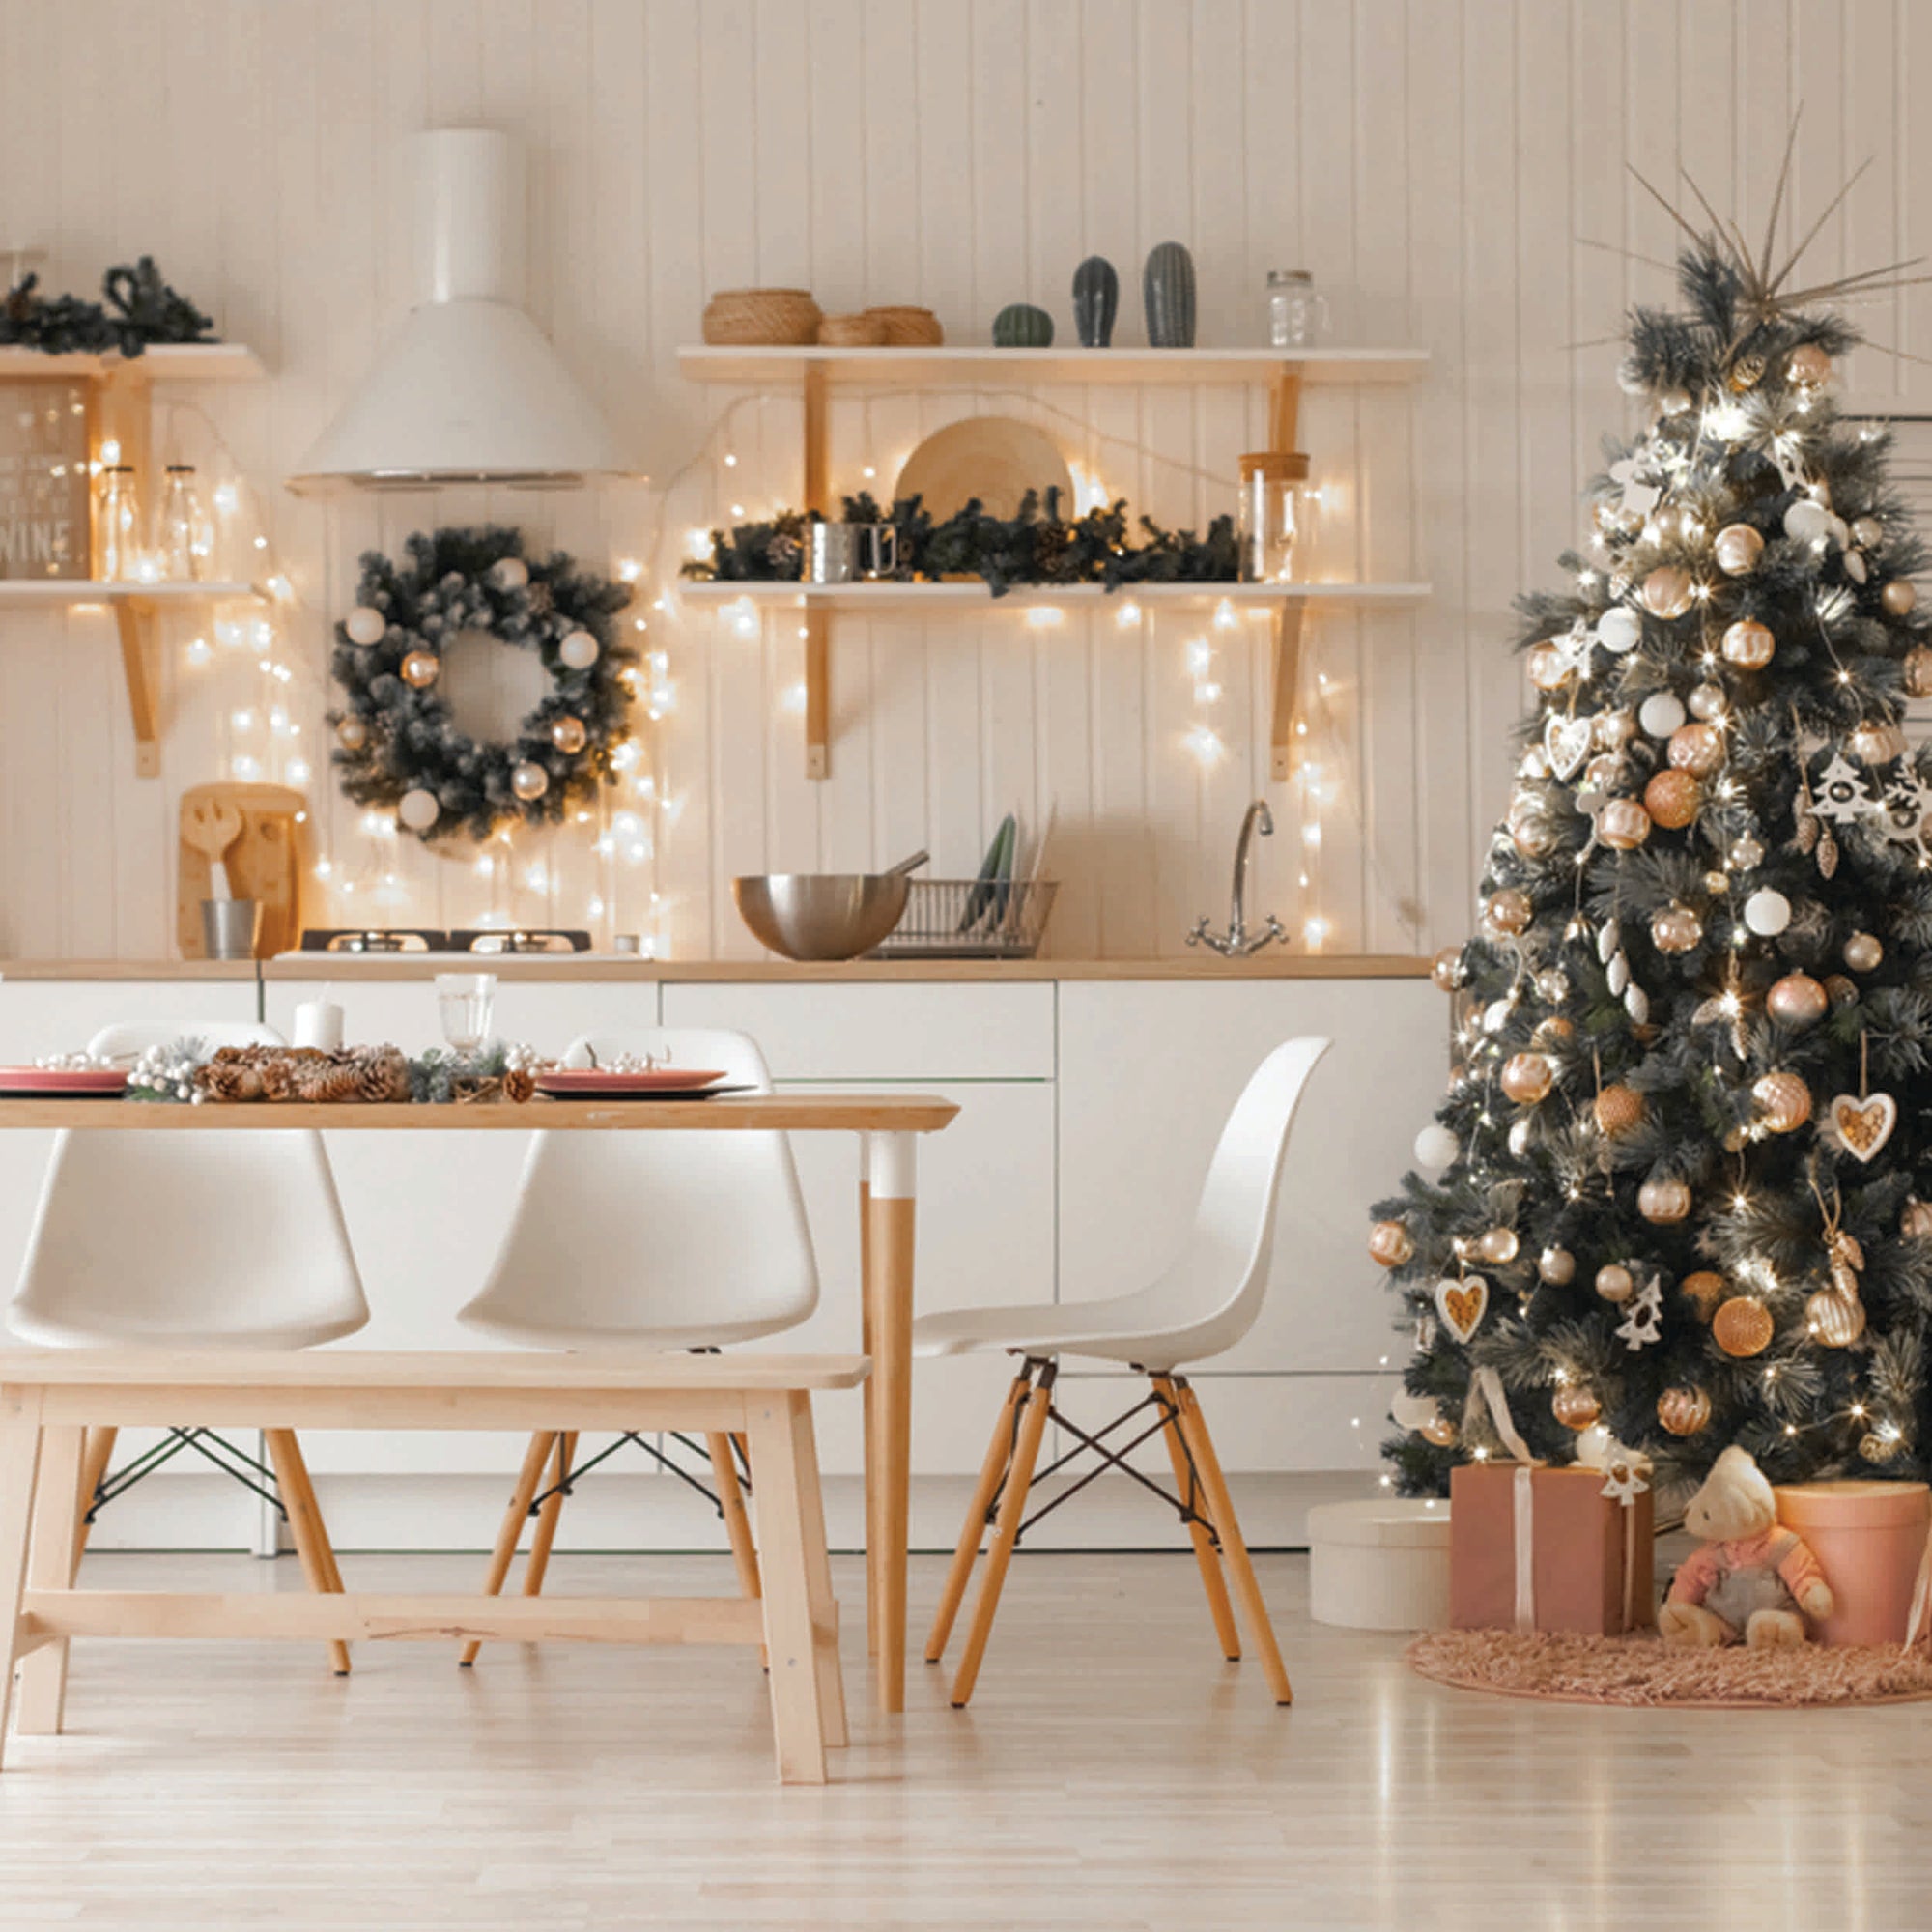 2022 Eco Home Holiday Gift Guide